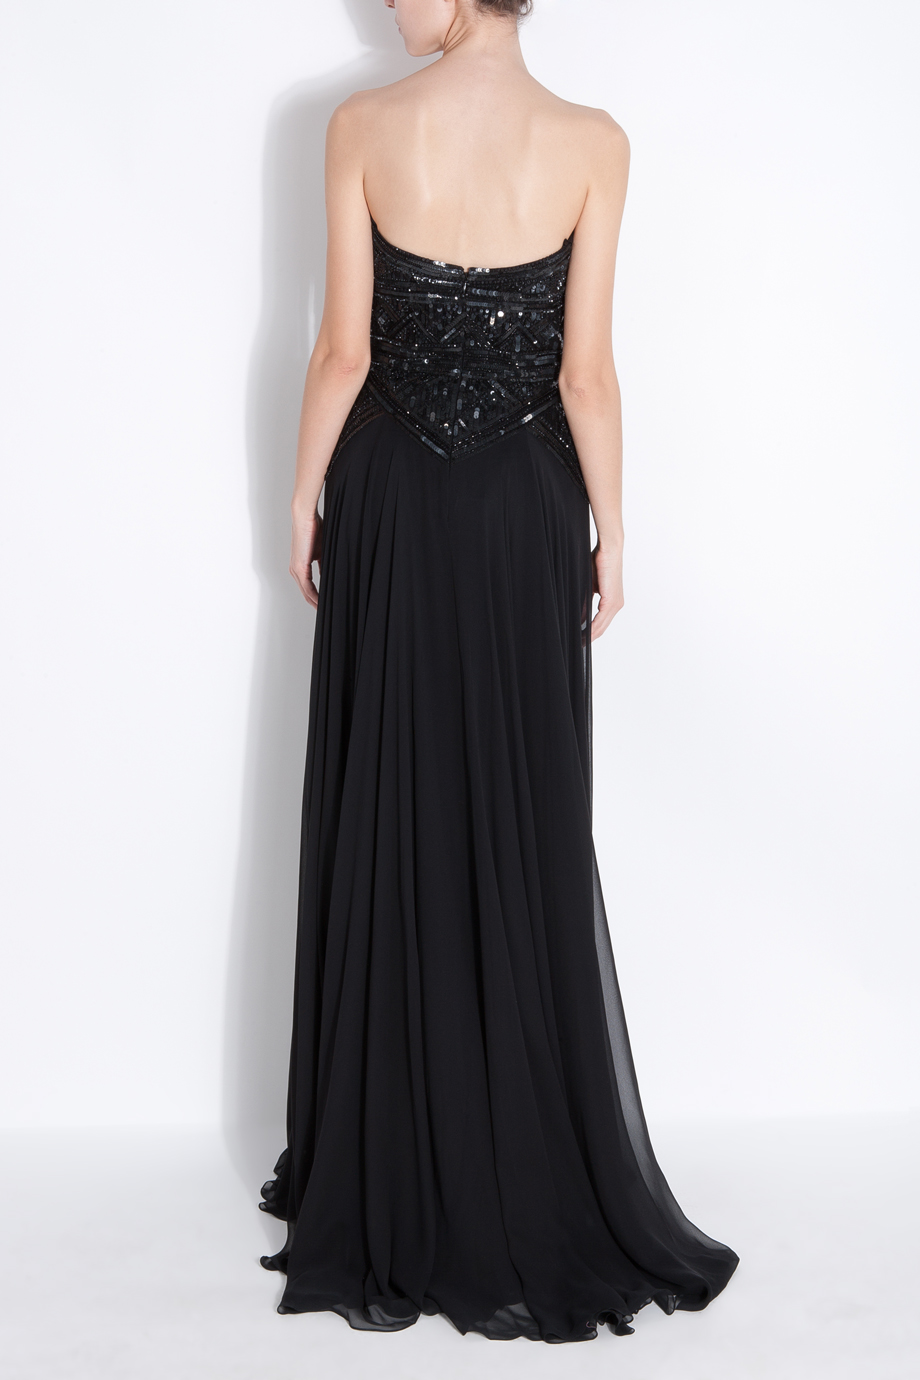 Lyst - Elie Saab Strapless 12 Beaded Gown in Black